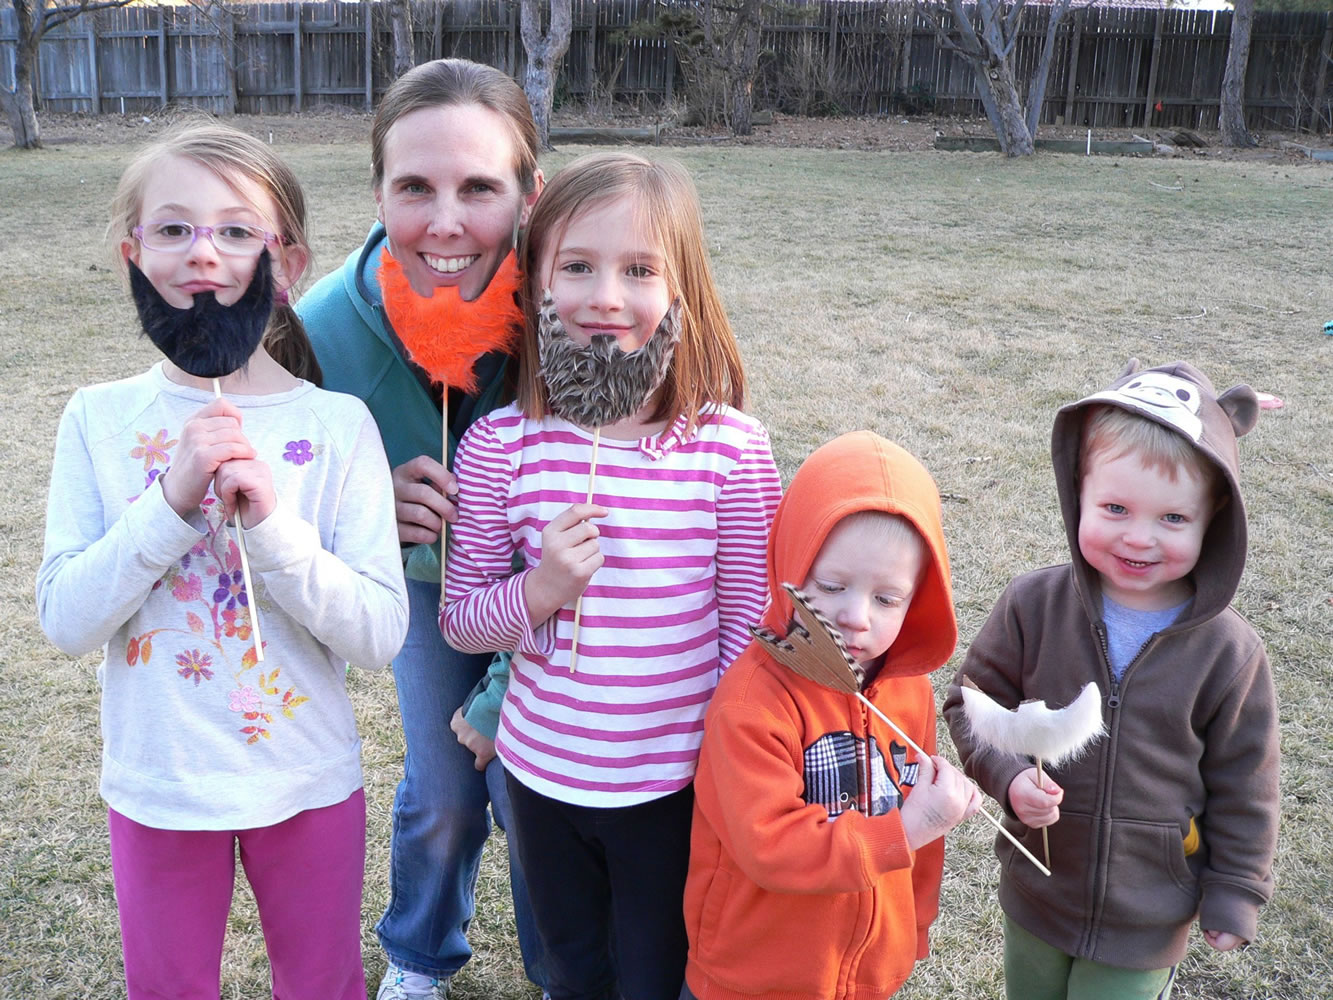 Tatum Marsh, 7, from left, parent Kristi Ainslie, and her children, Riley Ainslie, 6, Dillon Ainslie, 2, and Connor Ainslie, 2, model leprechaun beards made from faux fur and cardboard.